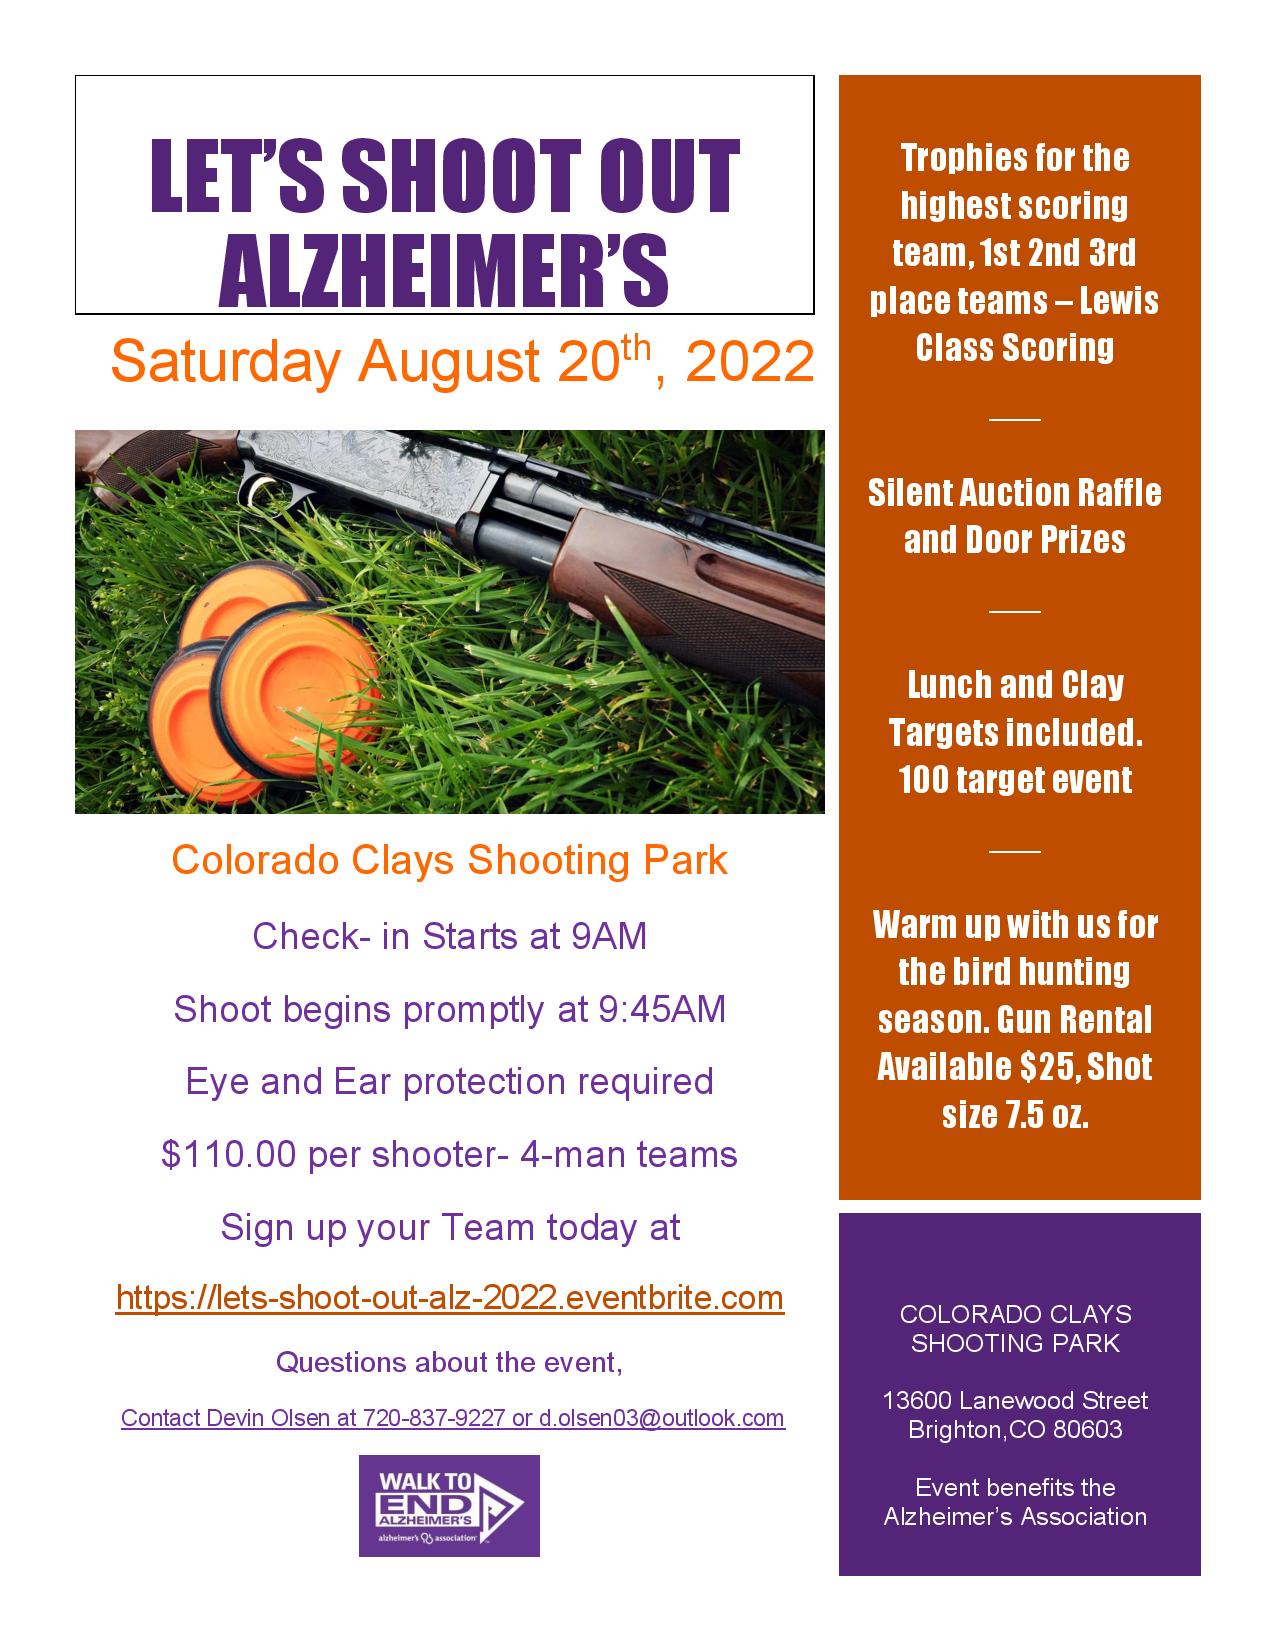 Let's Shoot Out Alzheimer's